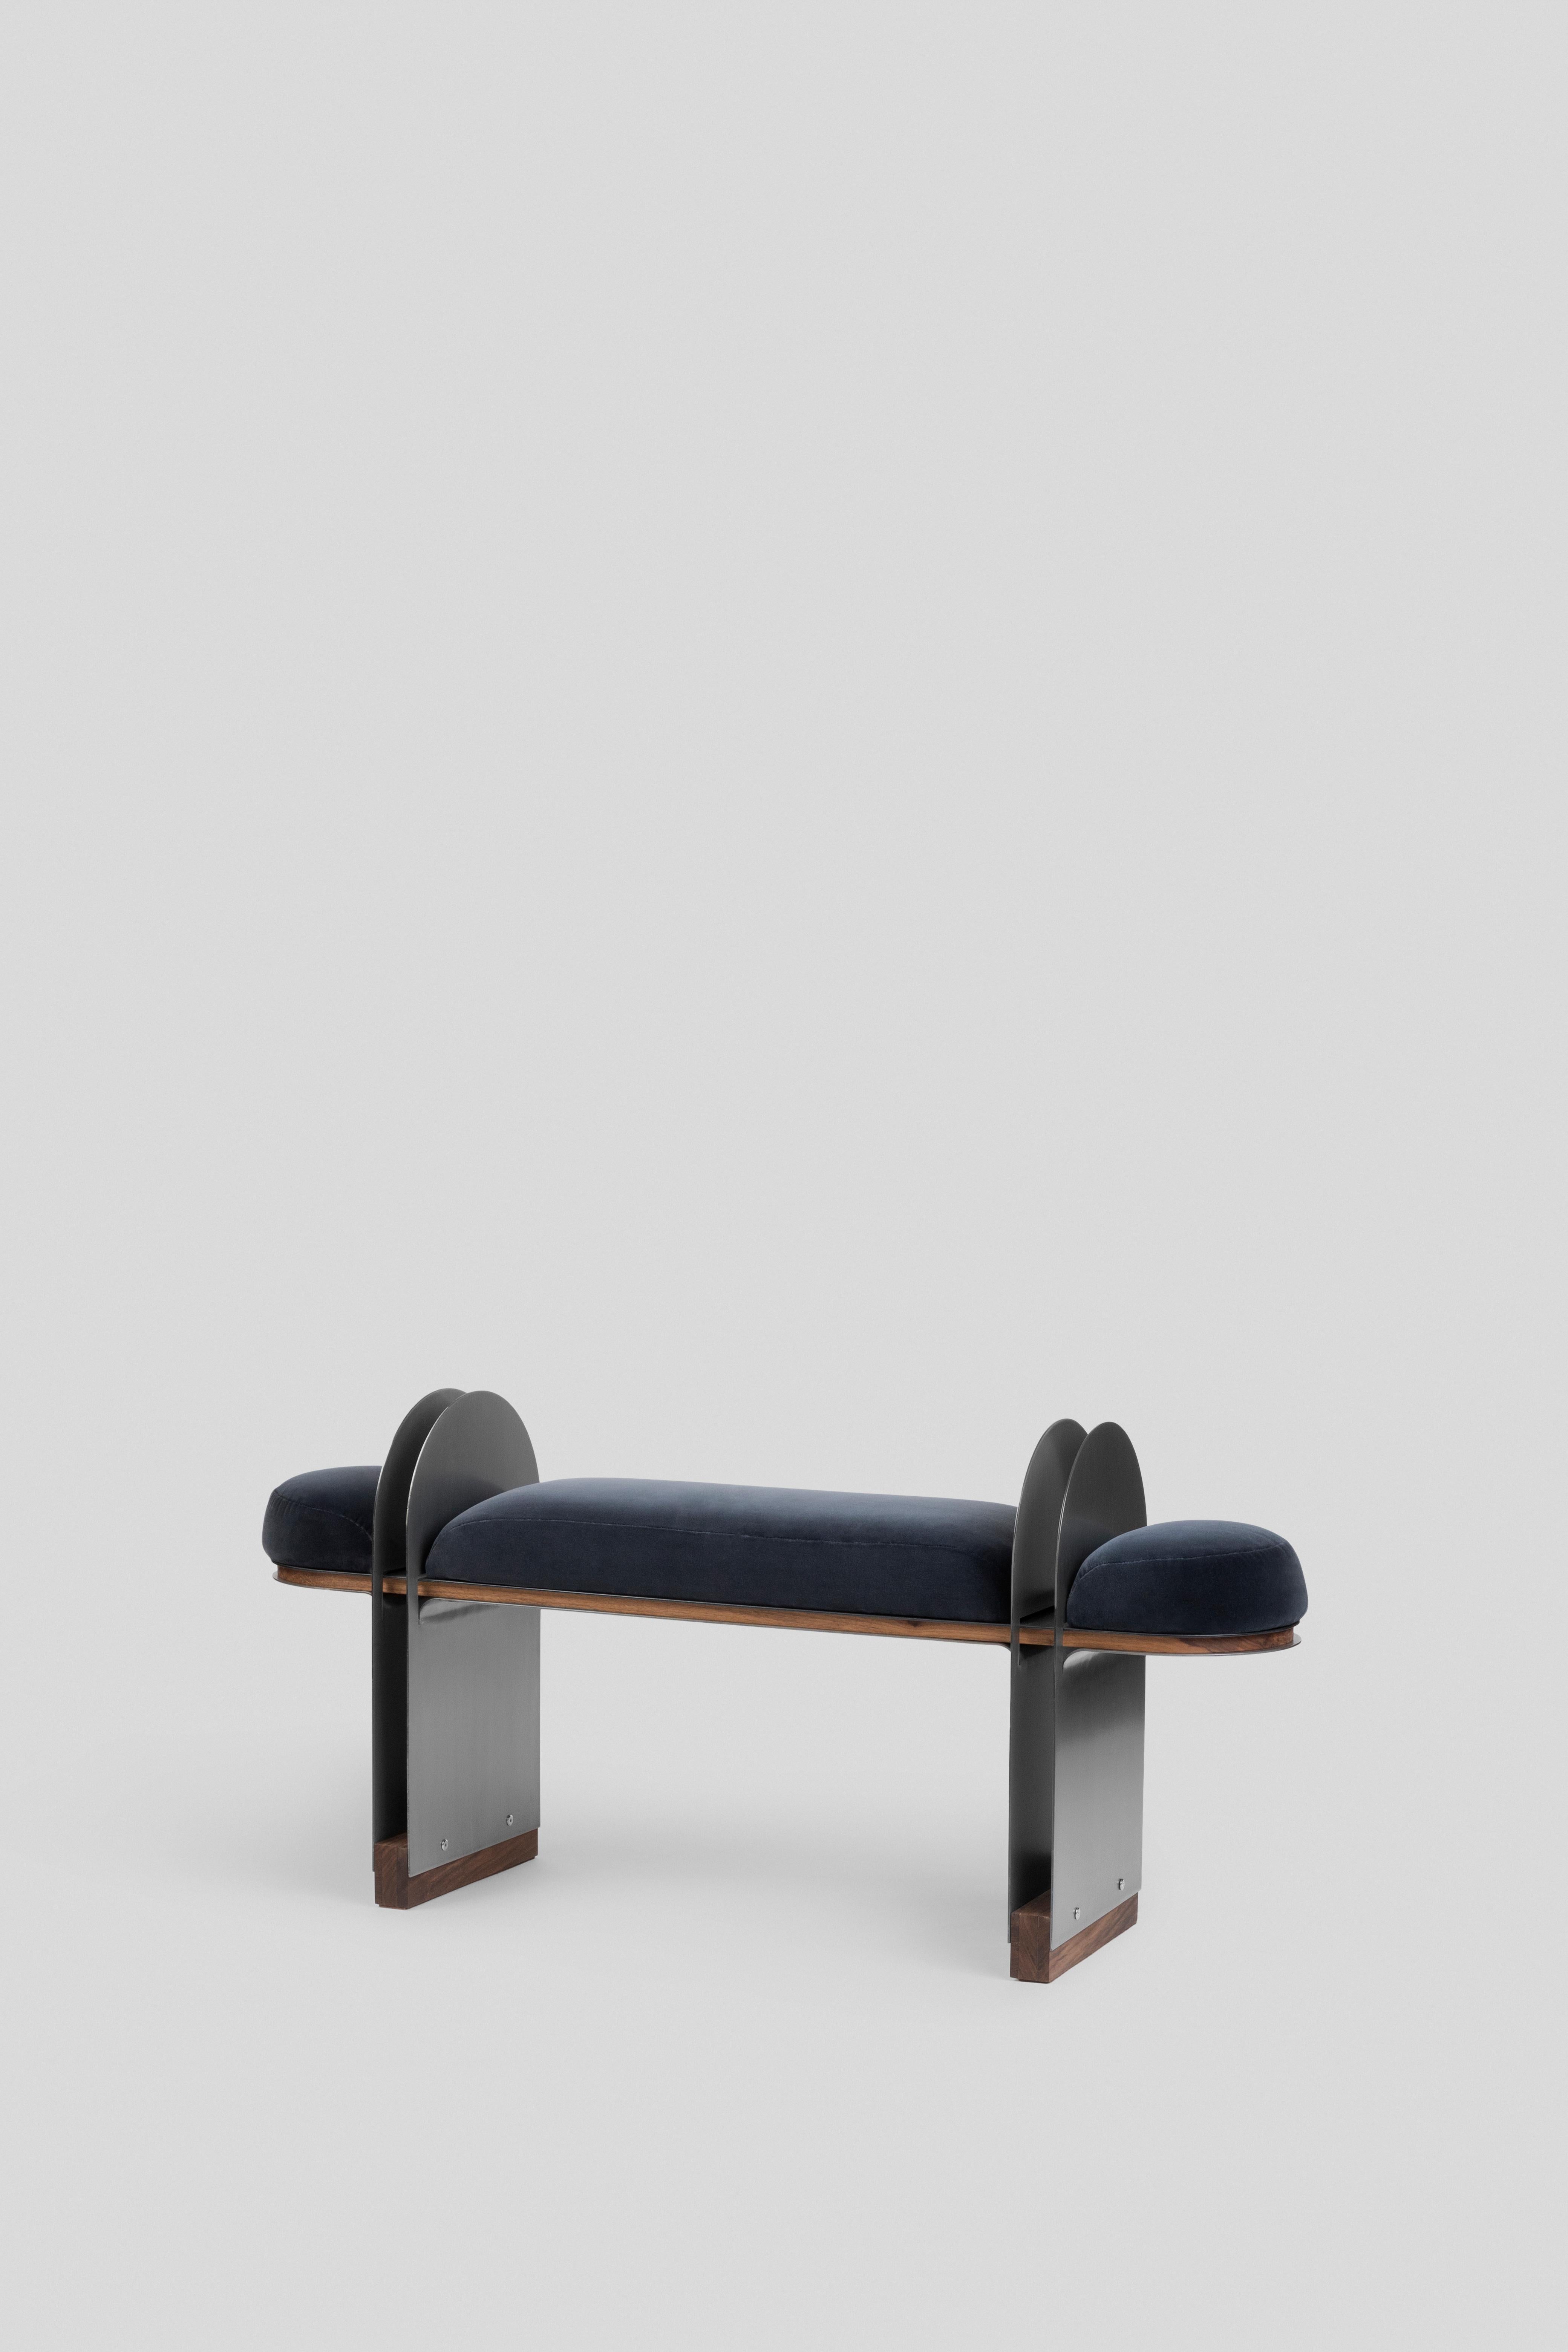 Mexican Contemporary Steel, Walnut, and Upholstery NAFIH Bench, by ADHOC For Sale